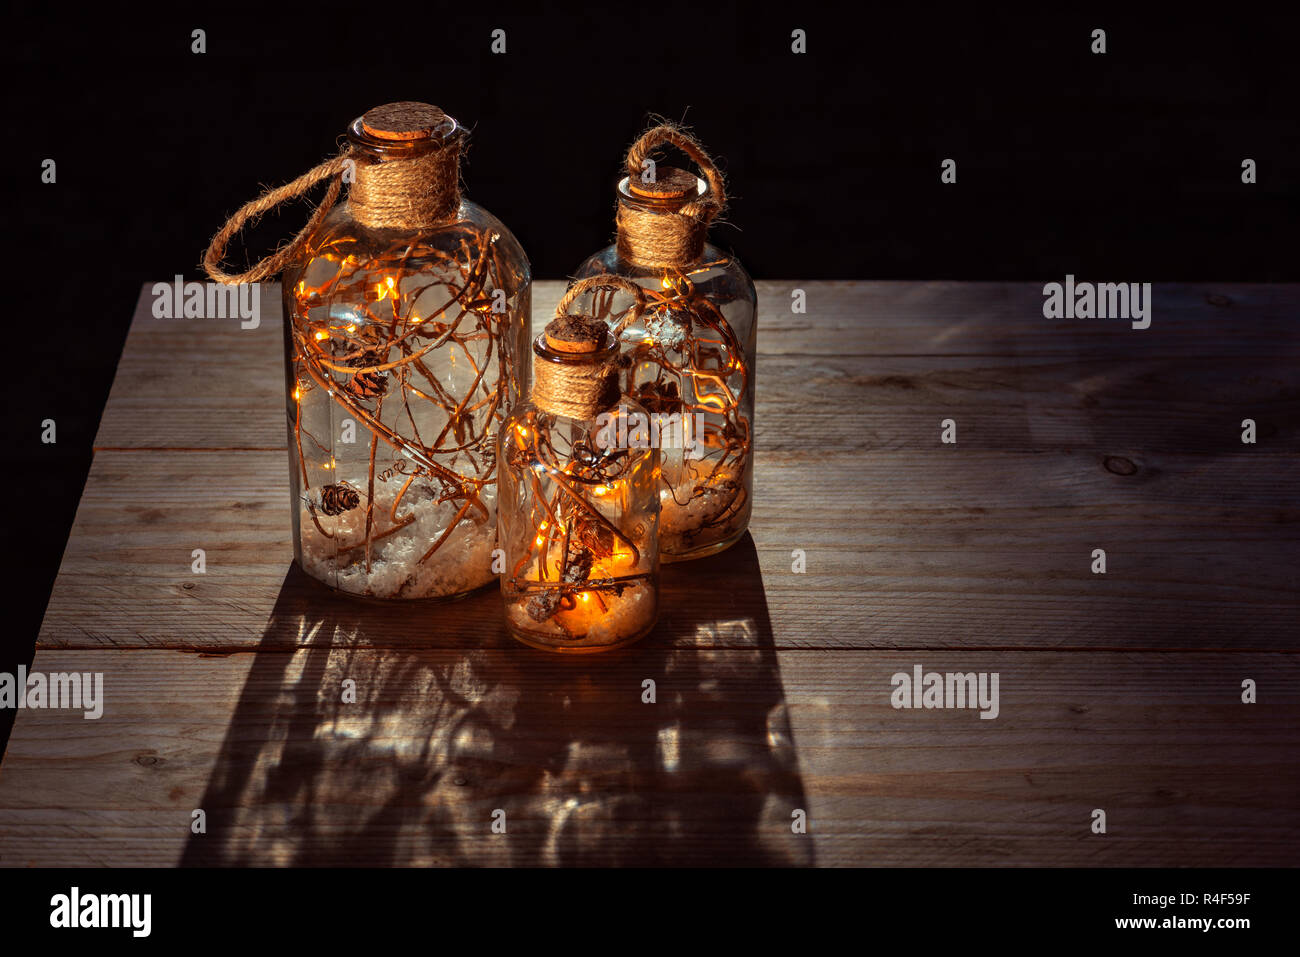 Bottles filled with lights, branches and snow standing on Outdoor Wooden Table Top at night Stock Photo